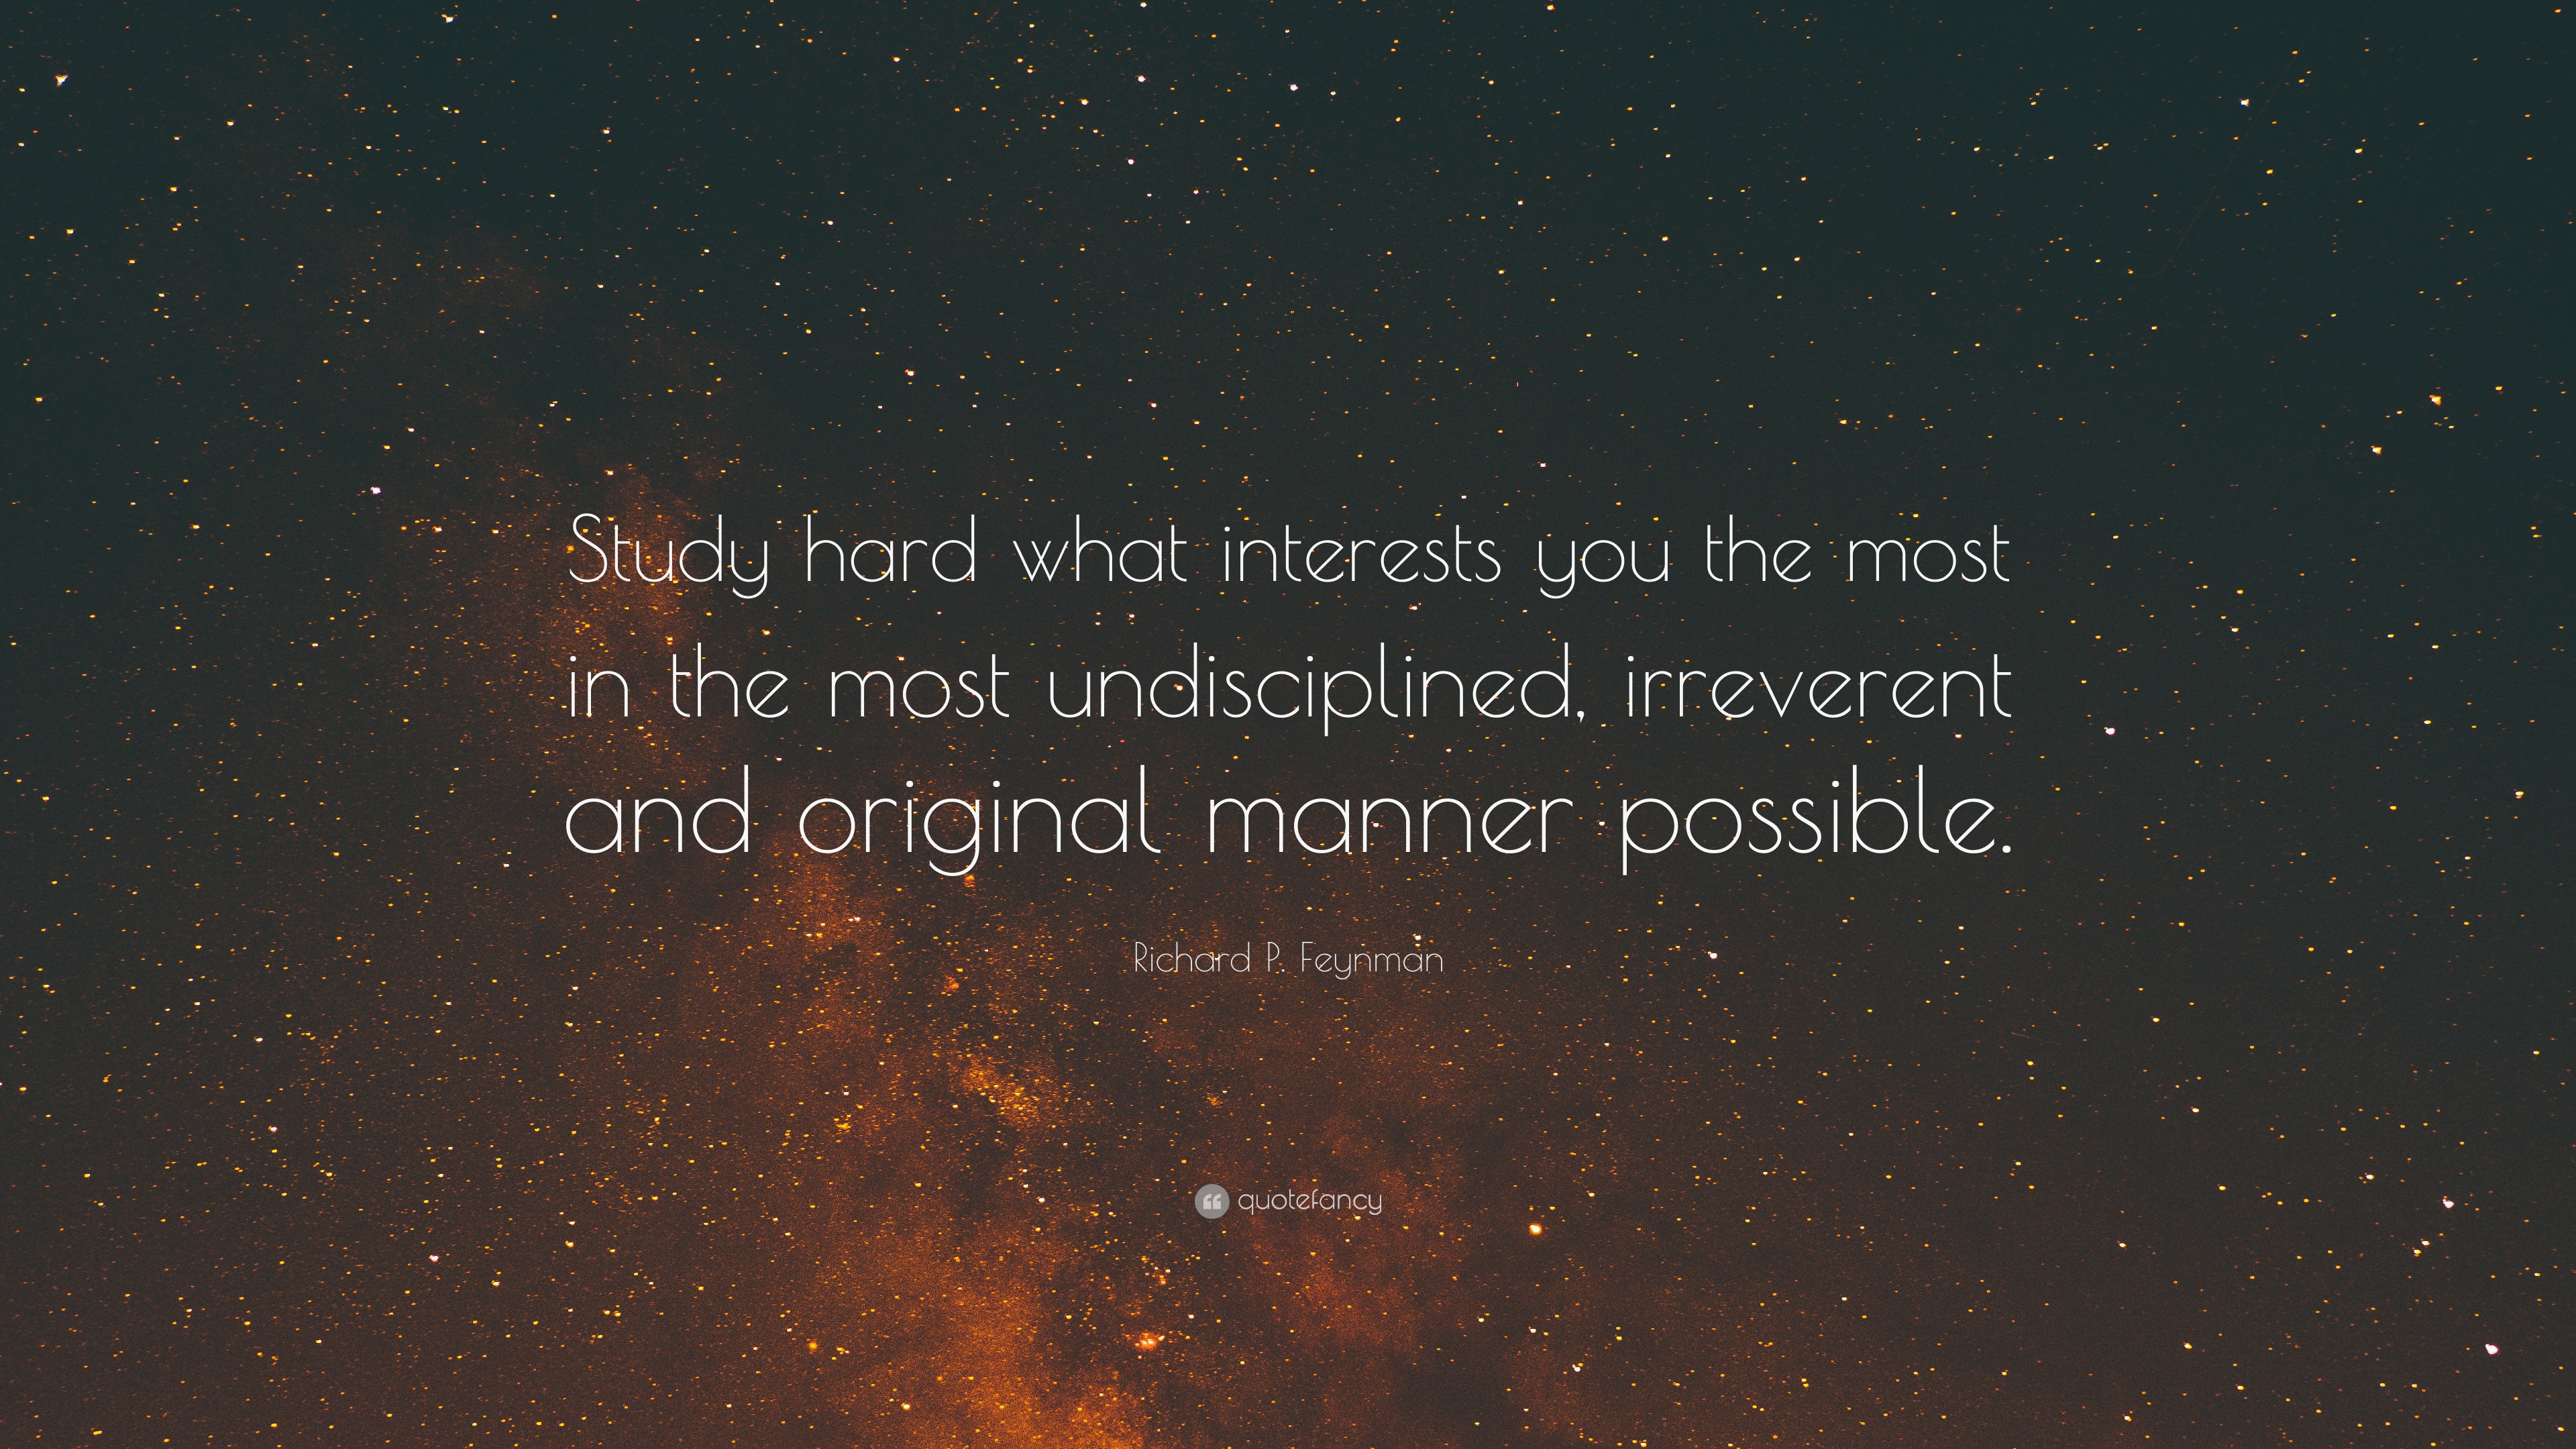 Richard P. Feynman Quote: “Study hard what interests you the most in